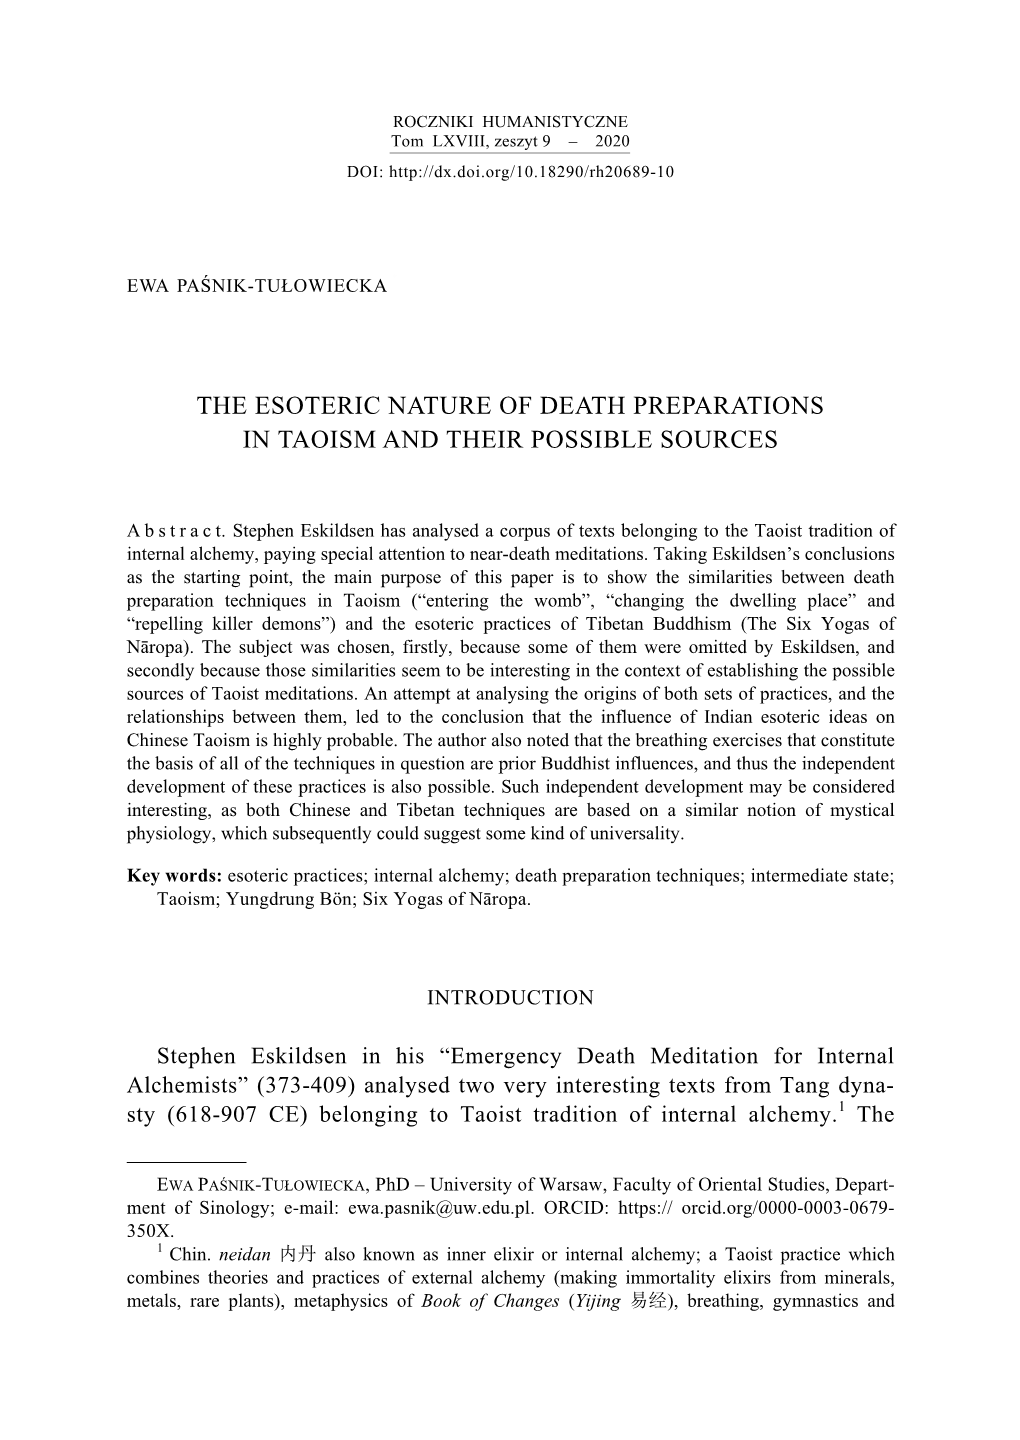 The Esoteric Nature of Death Preparations in Taoism and Their Possible Sources